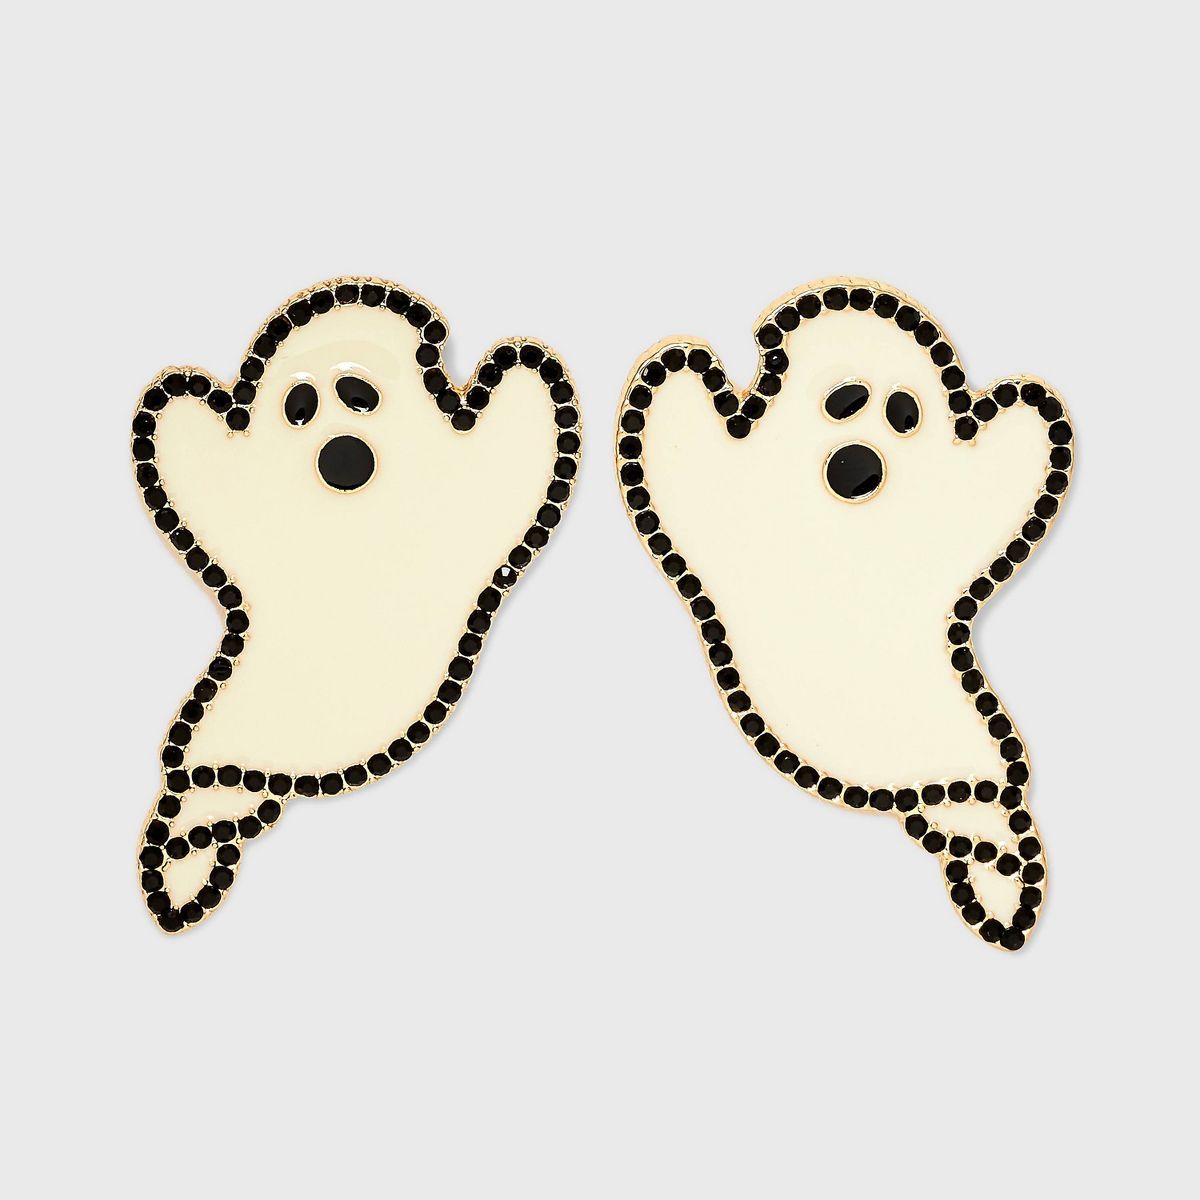 SUGARFIX by BaubleBar "Ghosted" Statement Earrings - Ivory | Target